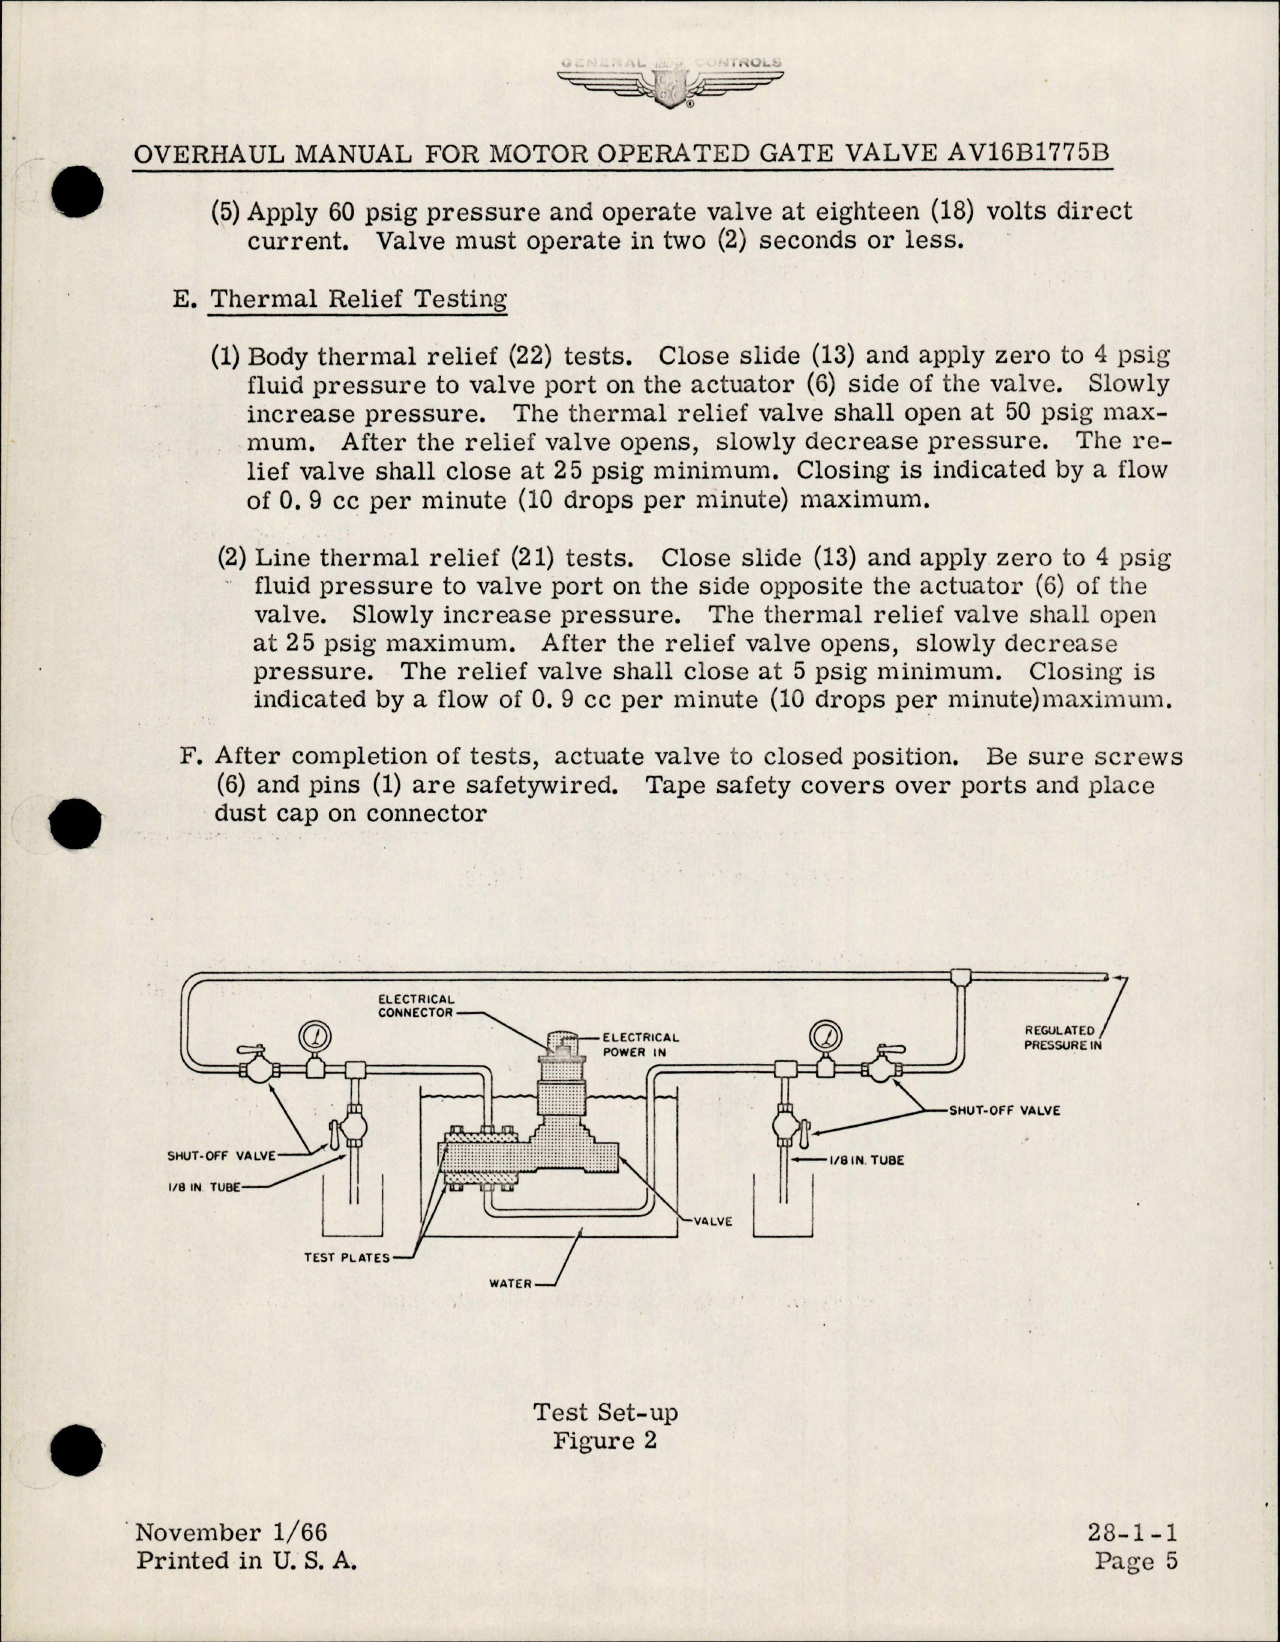 Sample page 7 from AirCorps Library document: Overhaul Manual for Motor Operated Gate Valve - AV16B1775B 